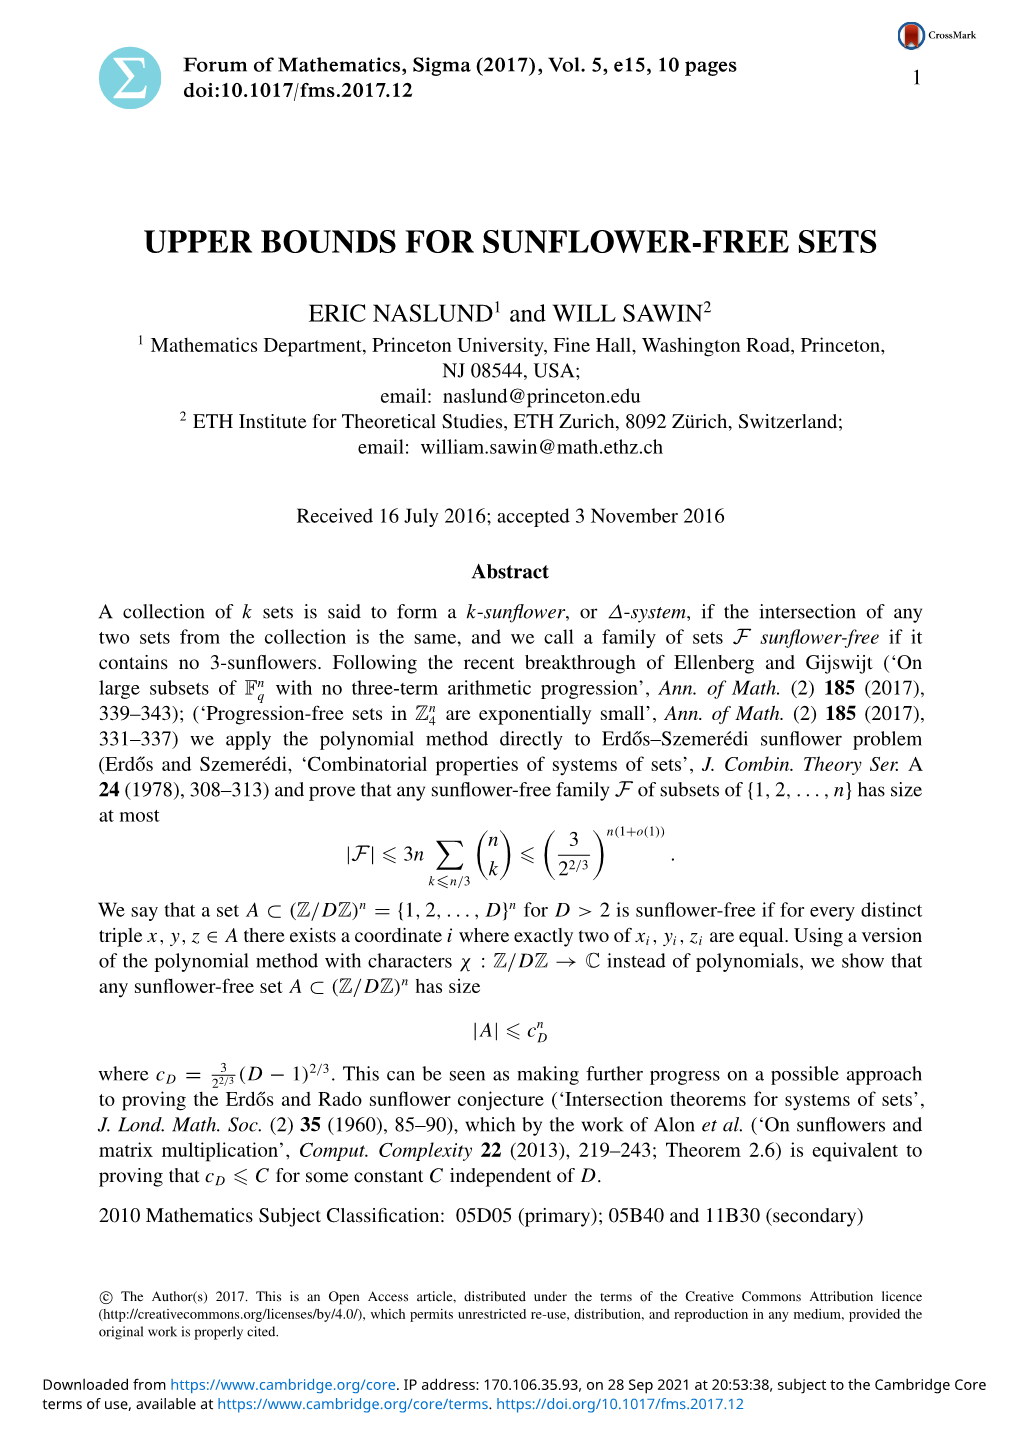 Upper Bounds for Sunflower-Free Sets